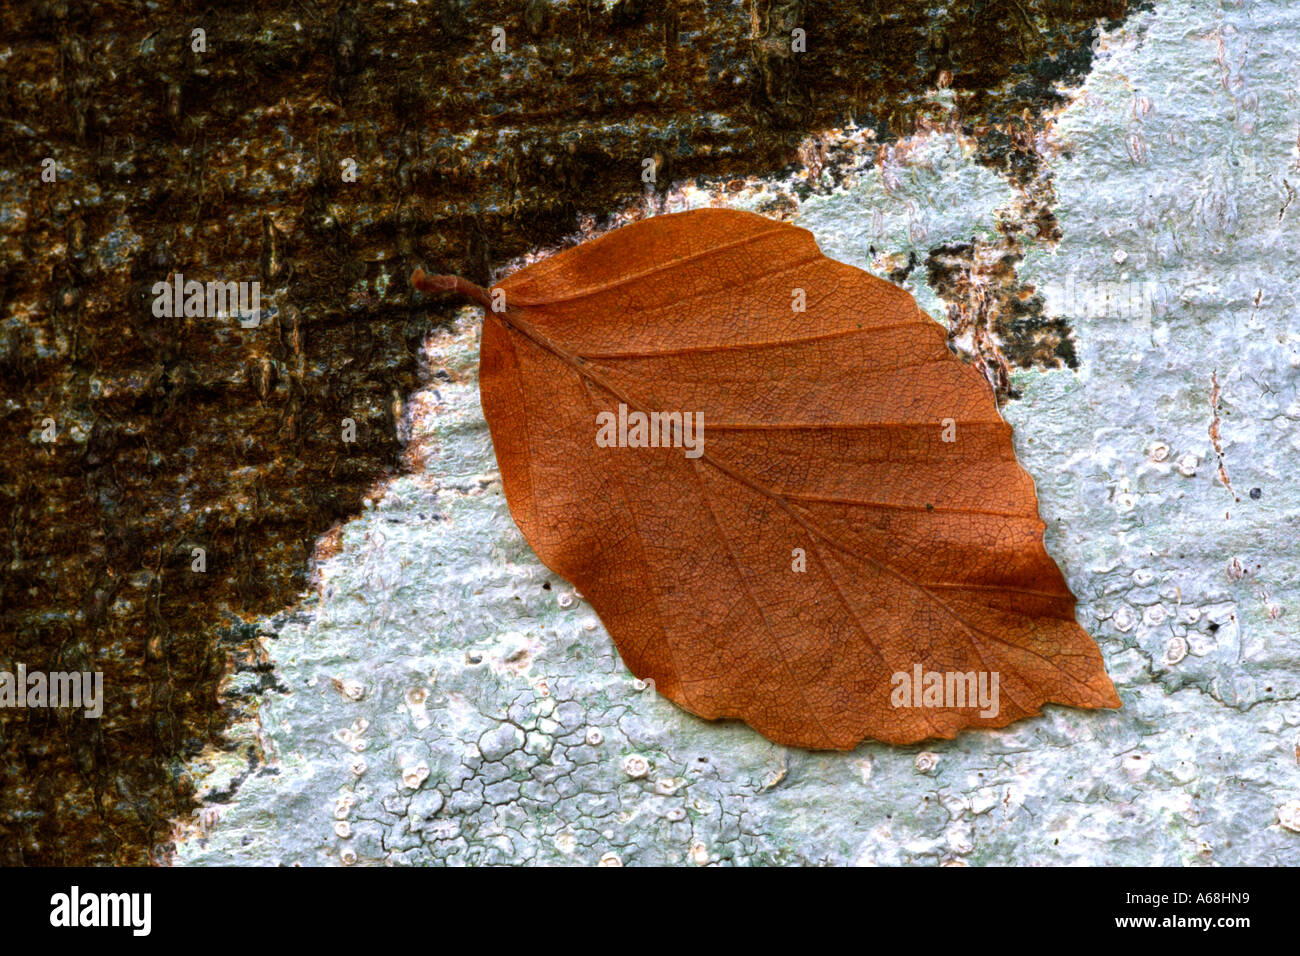 Fallen leaf of Beech (Fagus sylvatica) on the trunk of a Lichen covered Beech tree in late Autumn. Stock Photo